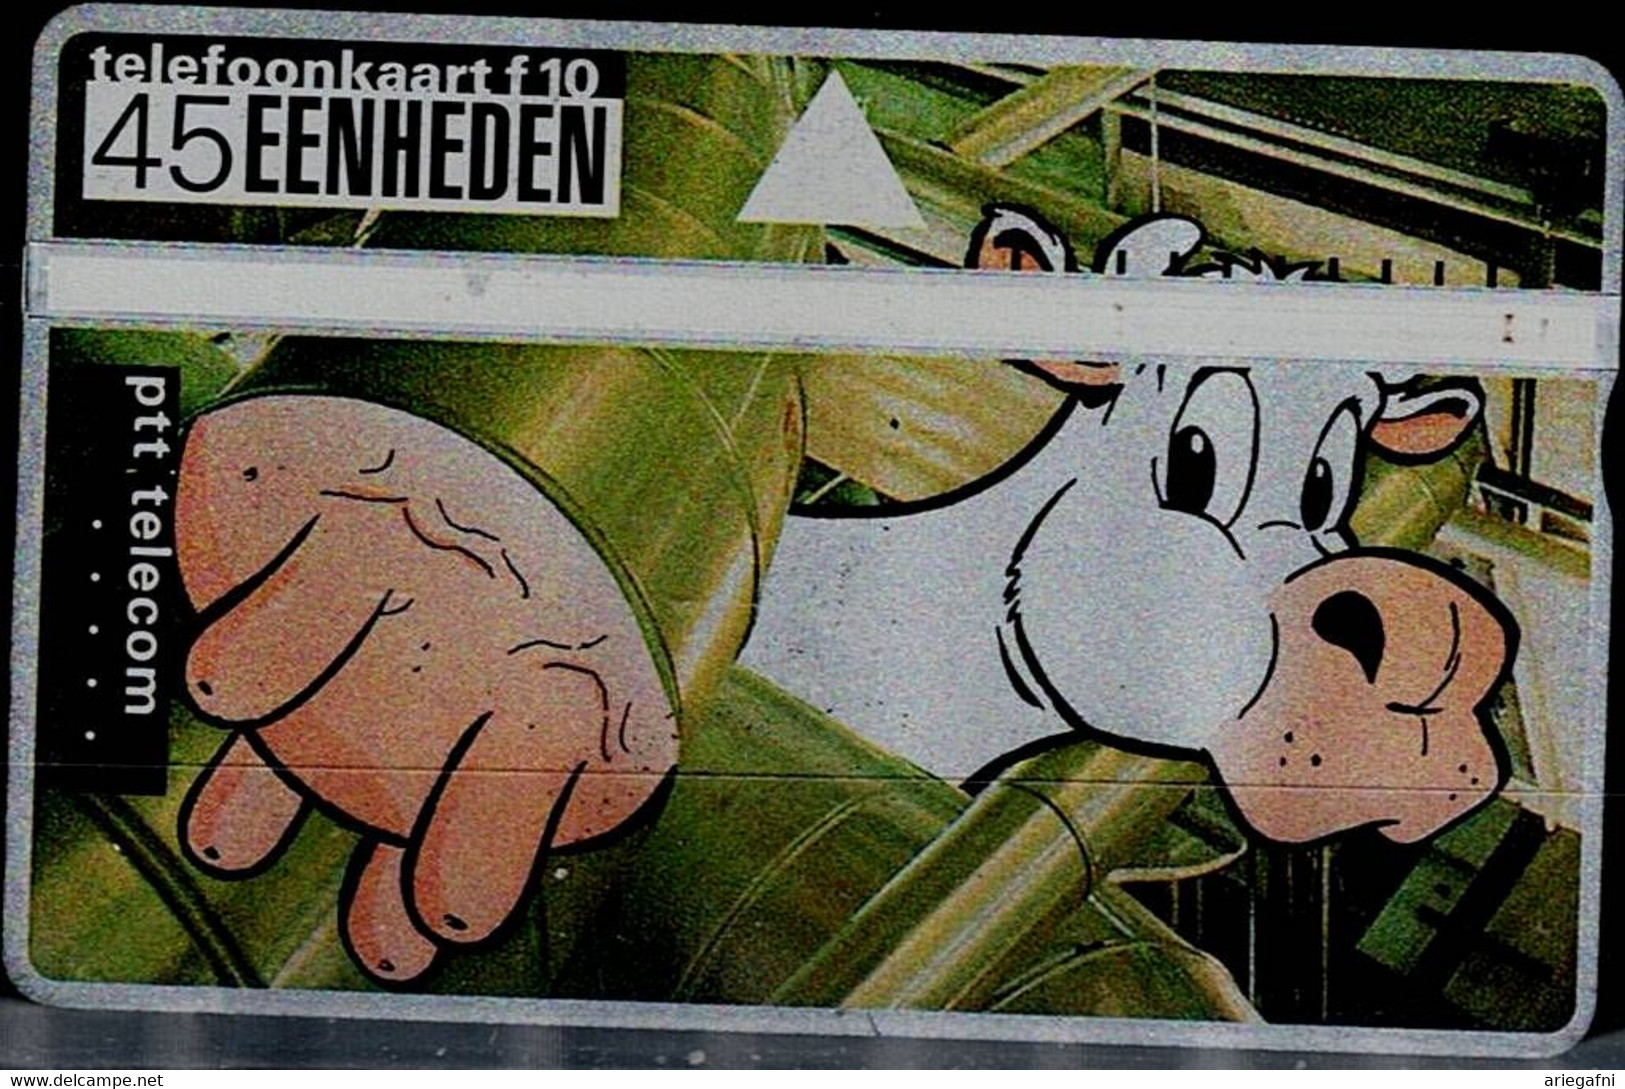 NETHERLANDS 1995 PHONECARD LOTS OF COWS, LOTS OF WORK USED VF!! - Public